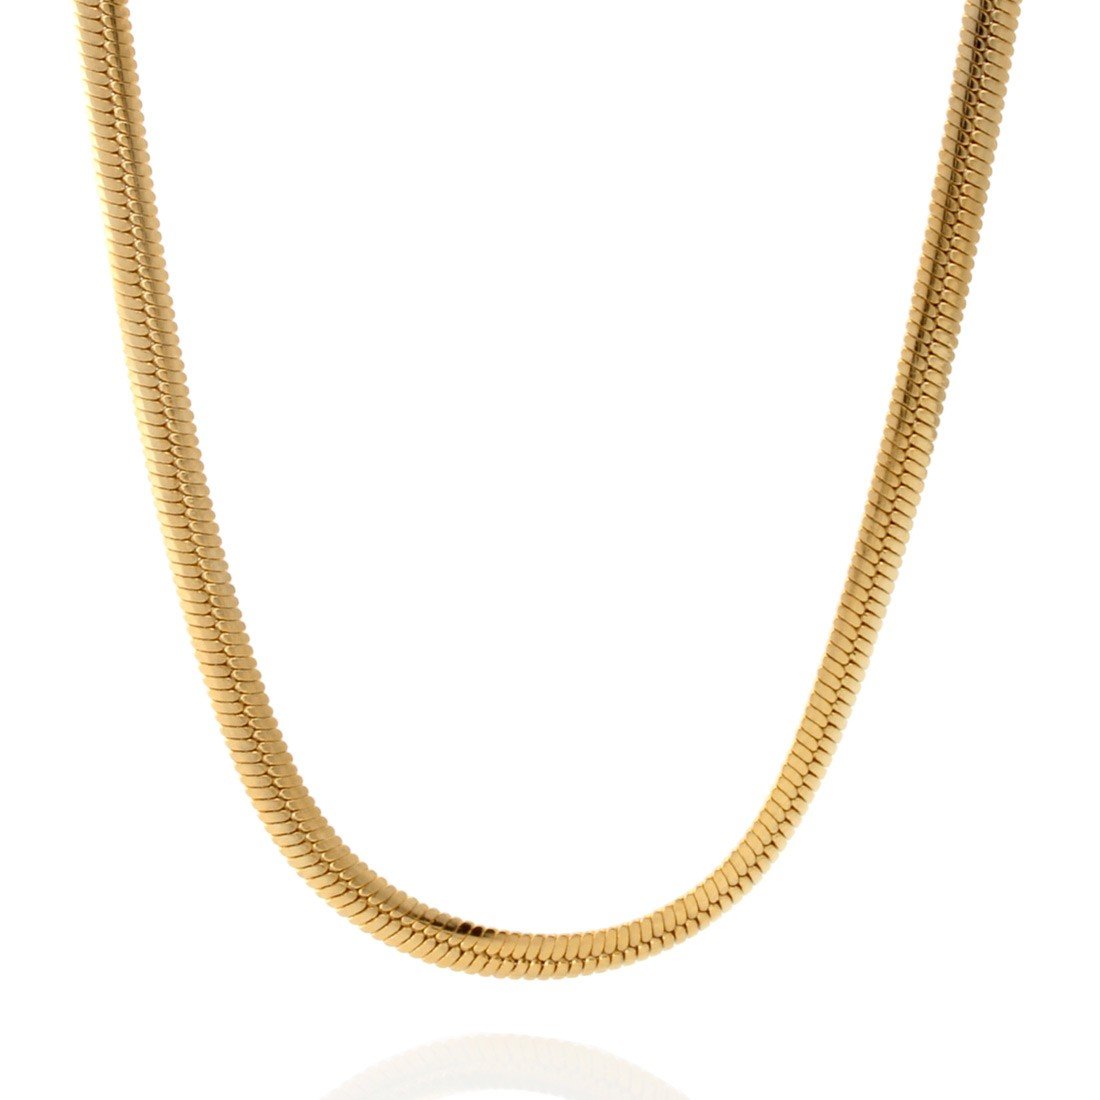 4mm thick 14k gold plated on solid sterling silver 925 Italian Herringbone chain necklace bracelet anklet with lobster claw clasp jewelry - 15, 20, 25, 30, 35, 40, 45, 50, 55, 60cm